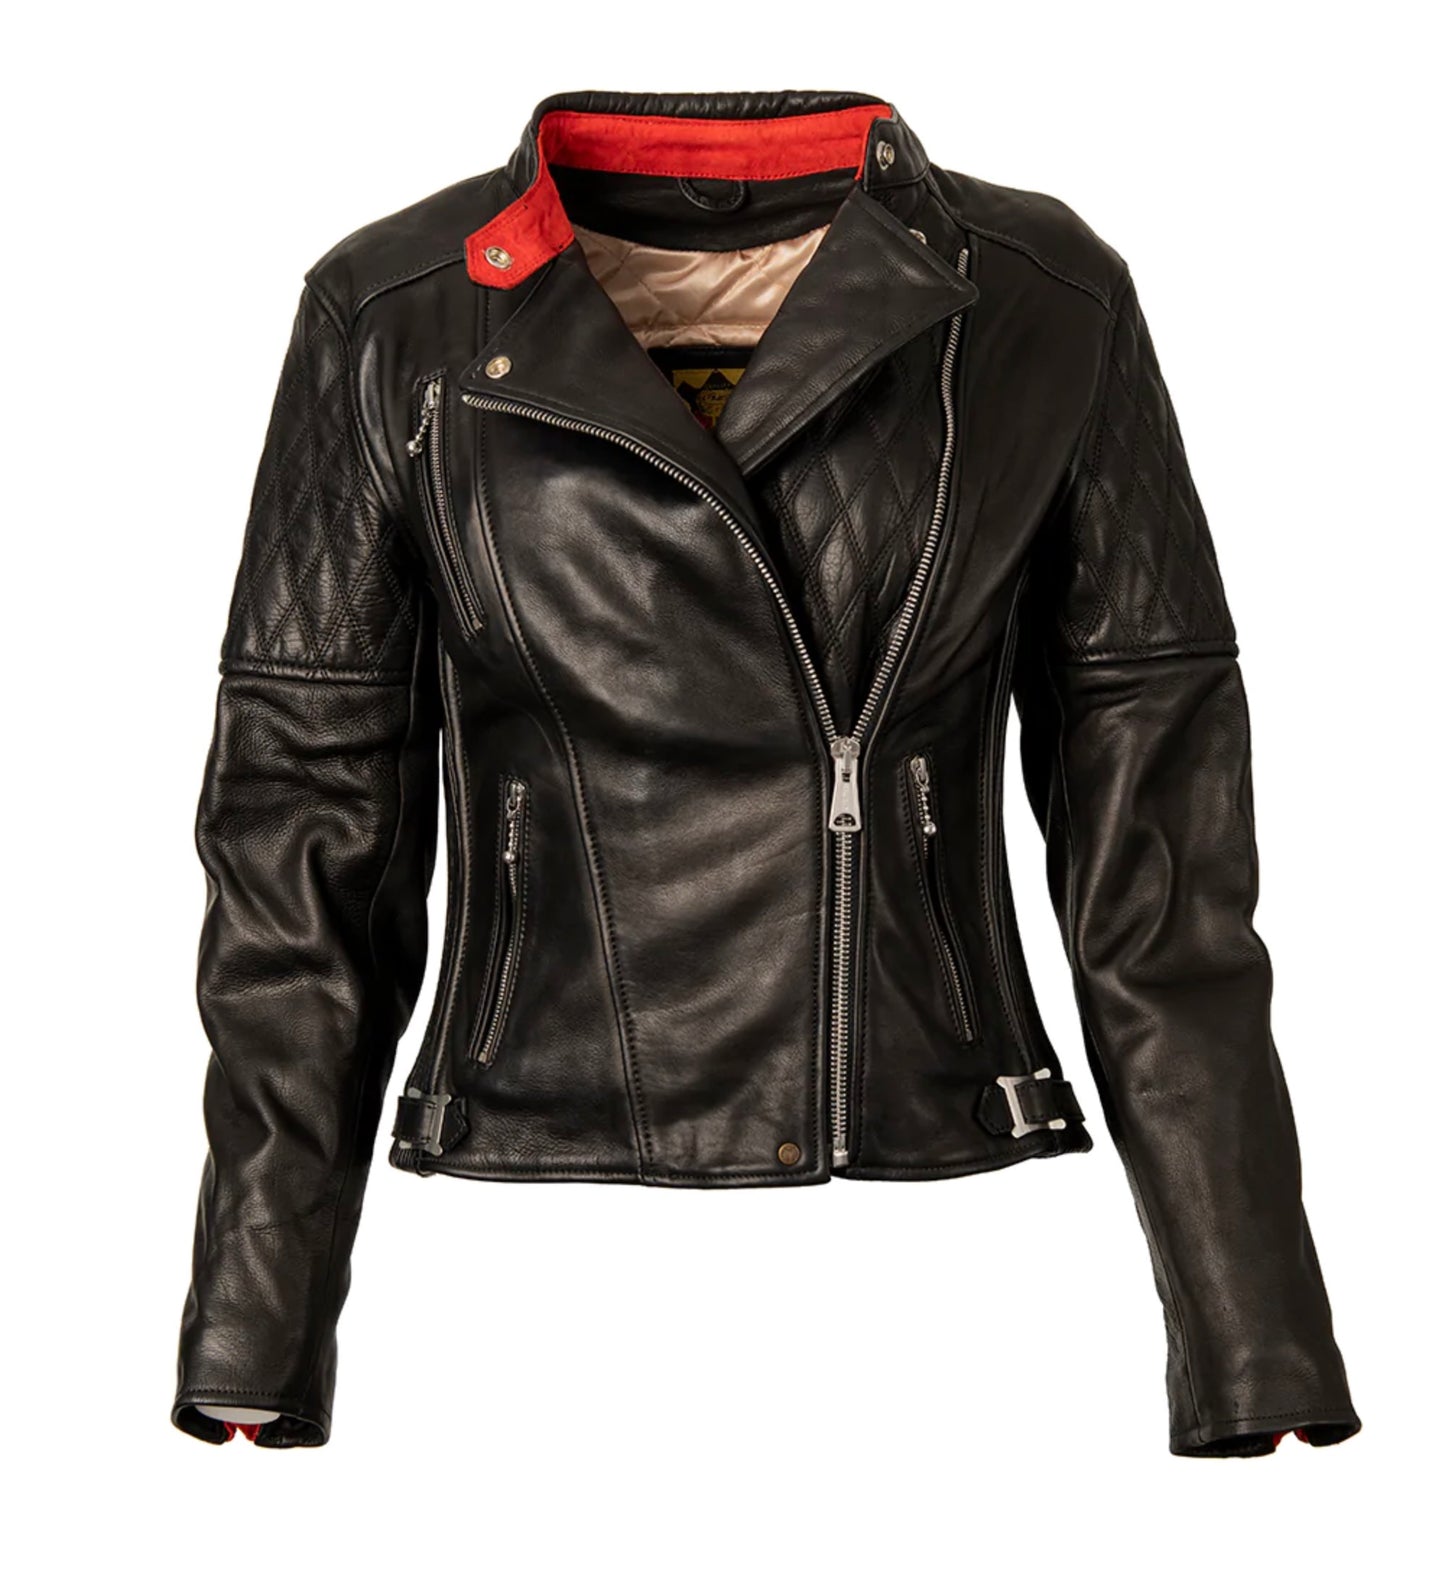 High quality women's Bobber leather jacket in black